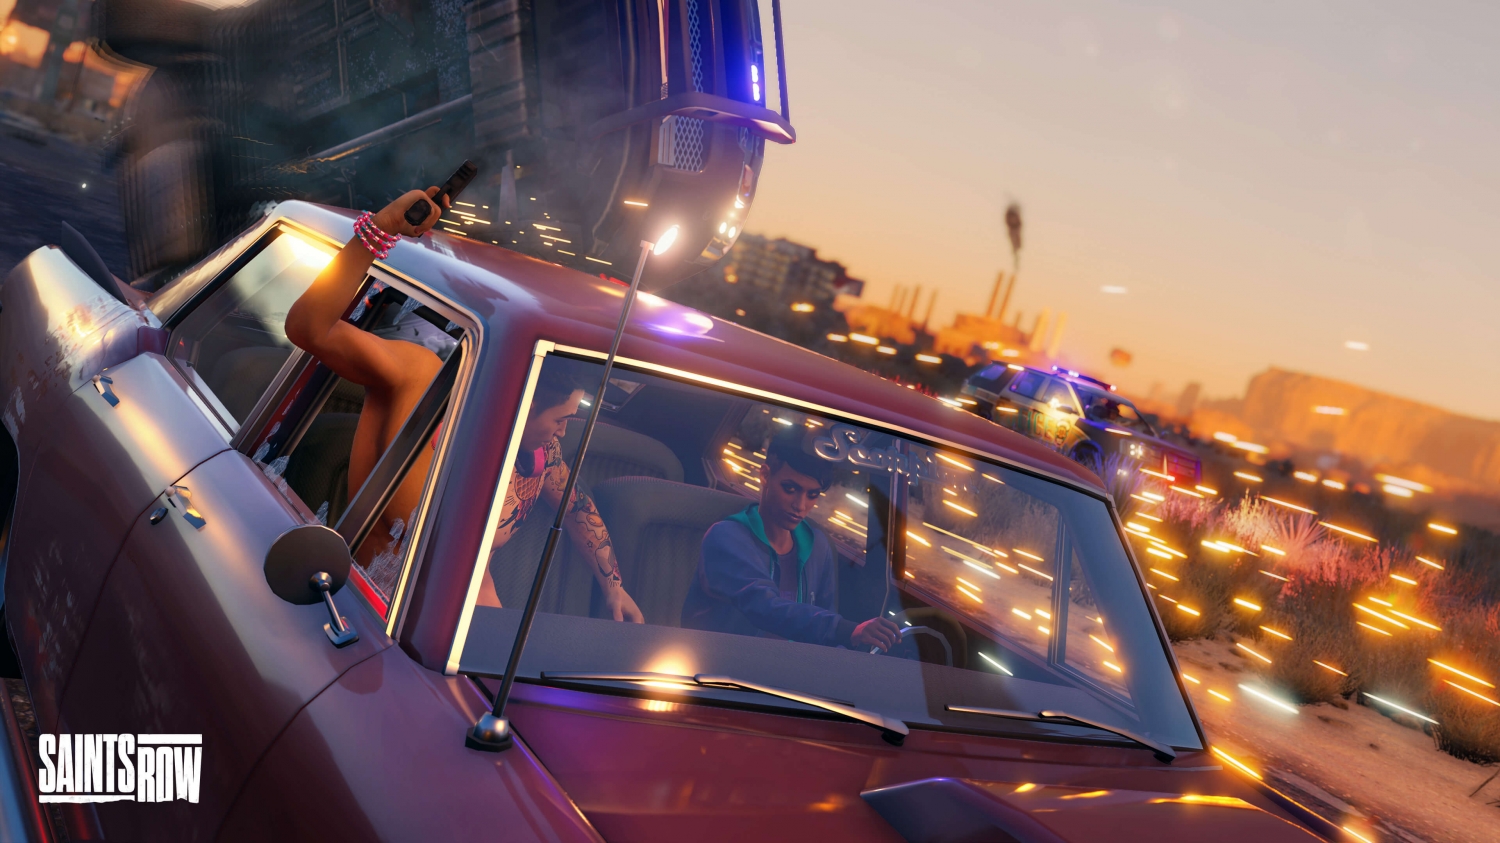 Meet The New Characters Of Saints Row - Game Informer